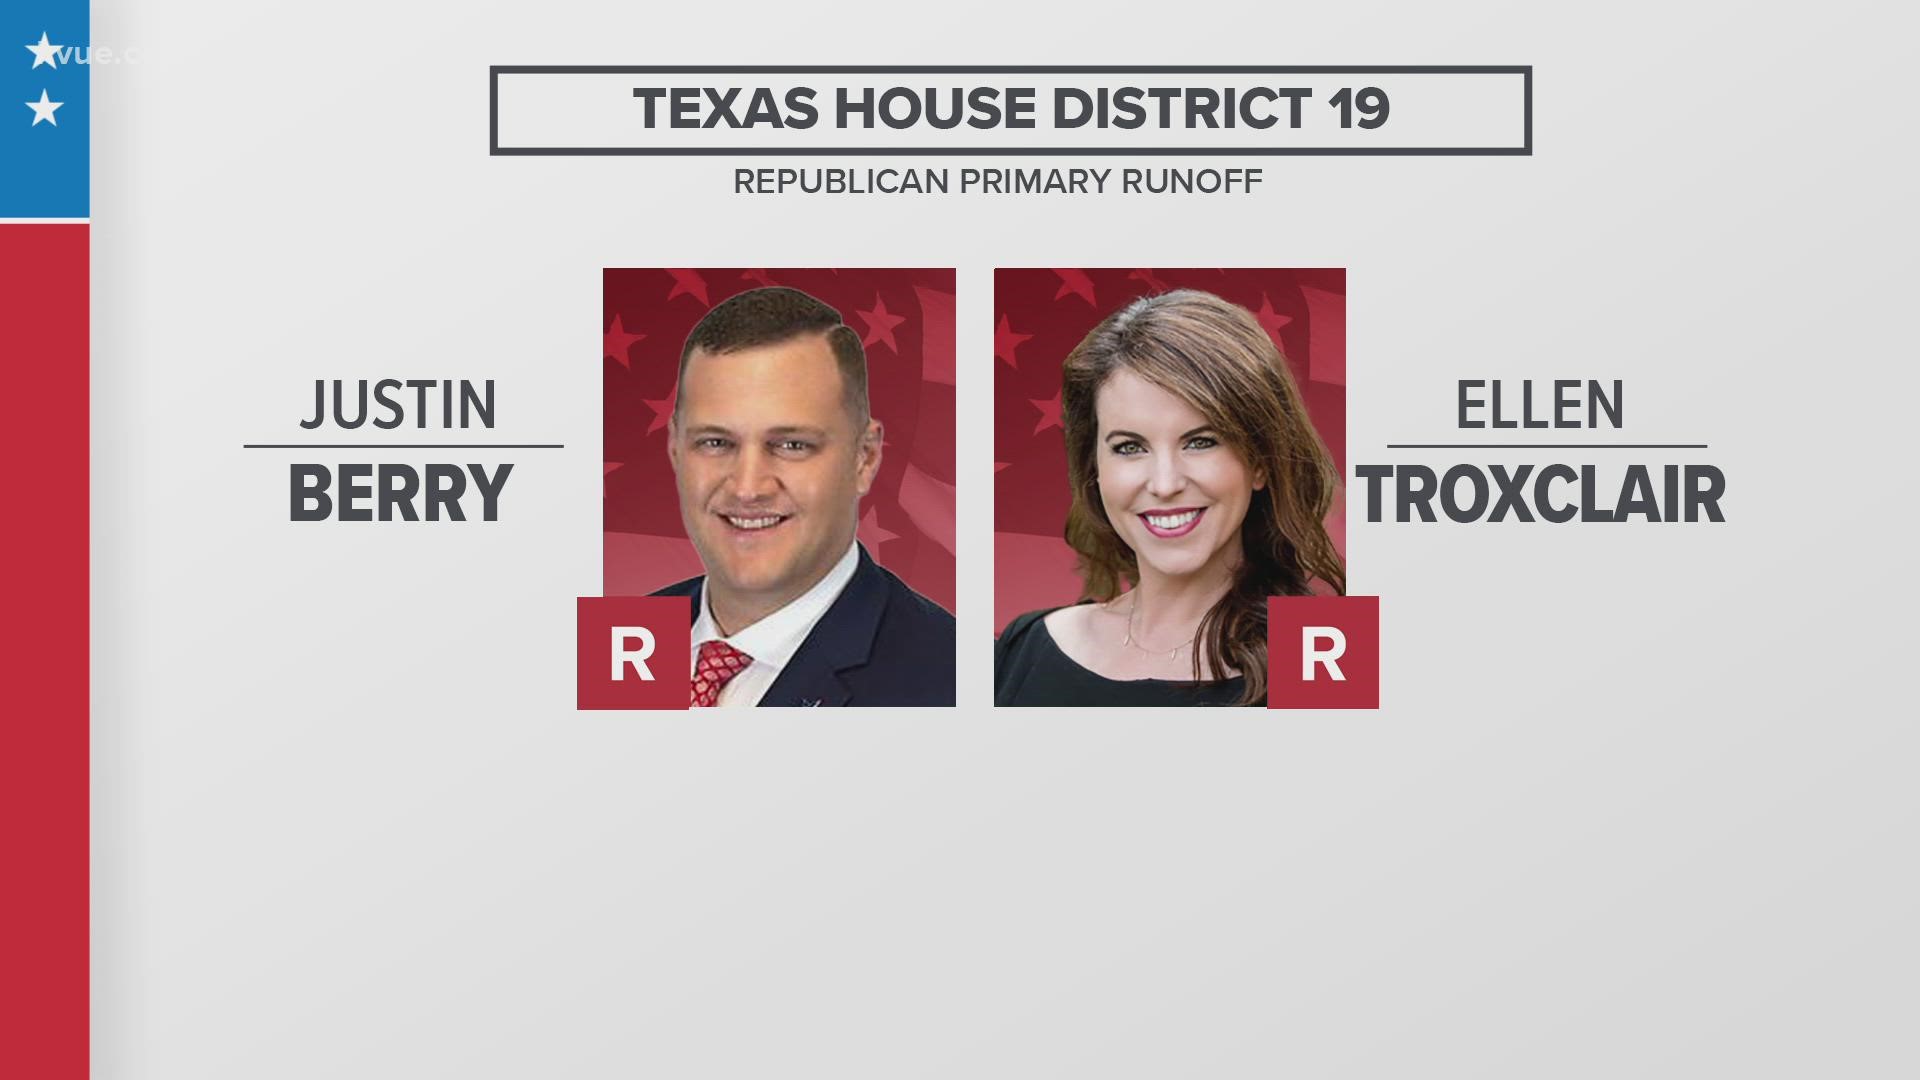 Here is everything you need to know ahead of the May 24 Texas primary runoff election, from where to vote to what's on the ballot.